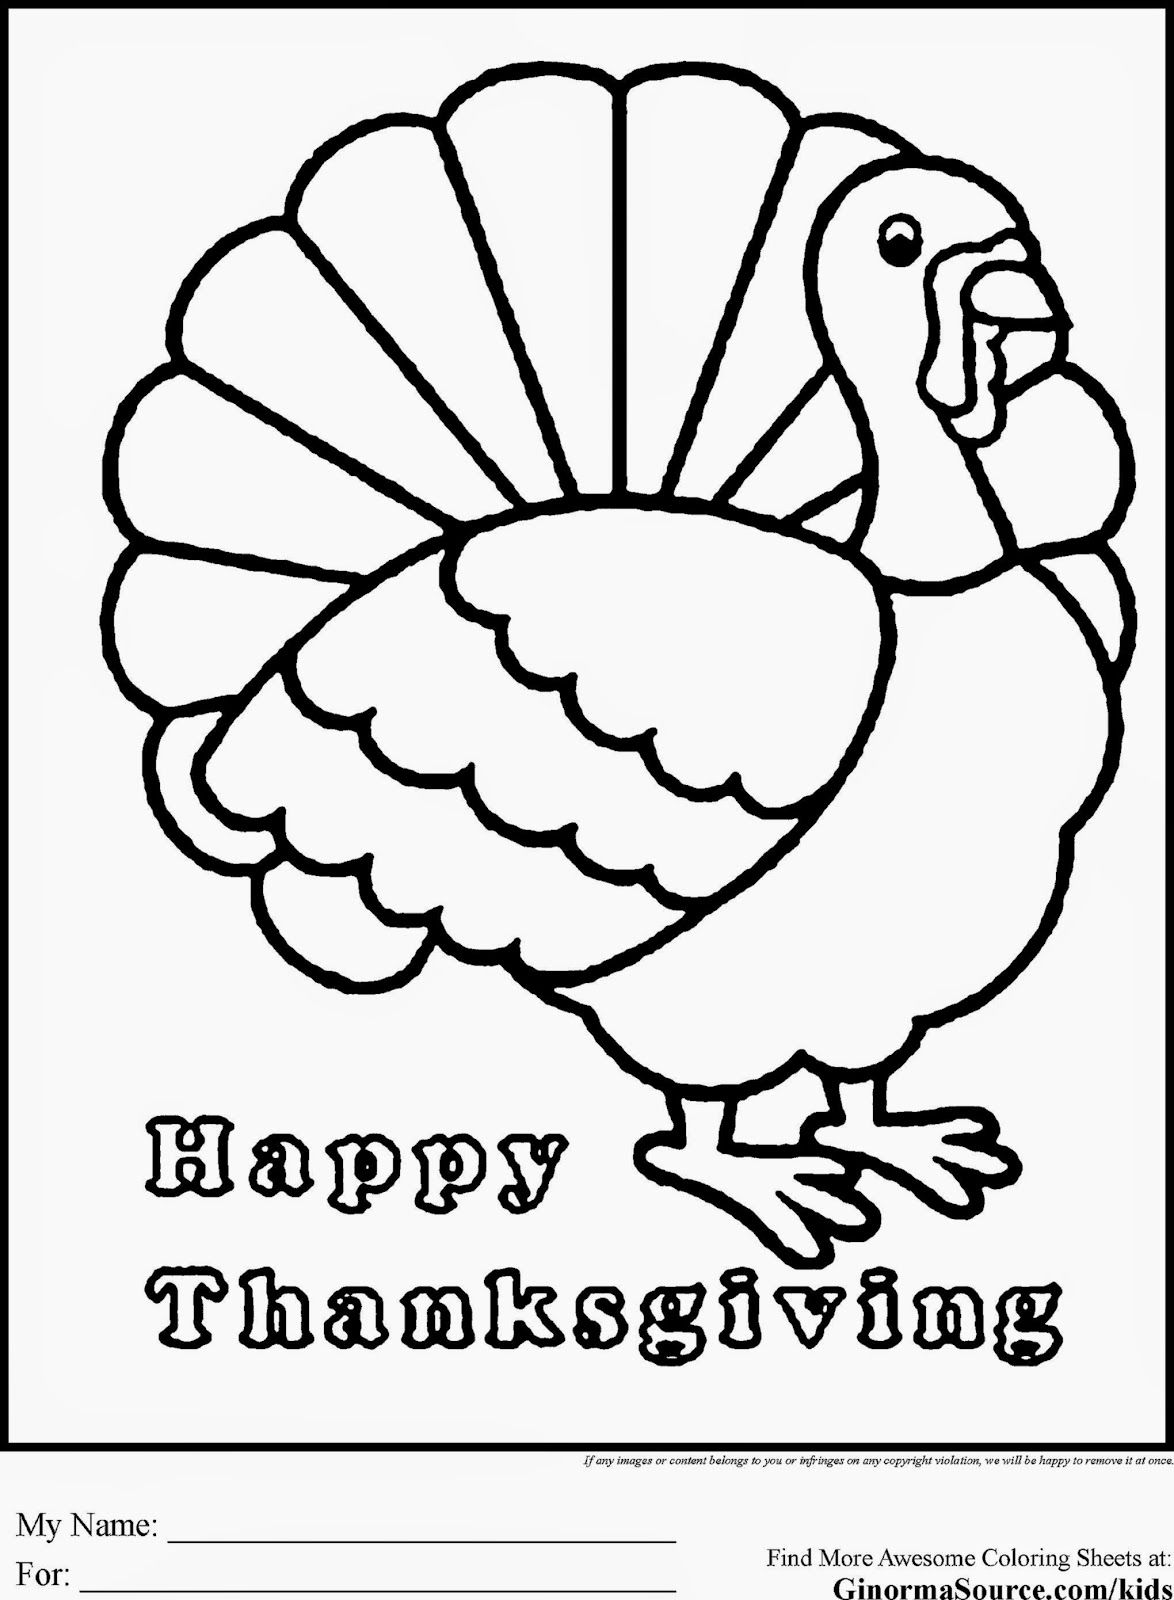 Happy Thanksgiving Coloring Pages | Free Coloring Pages